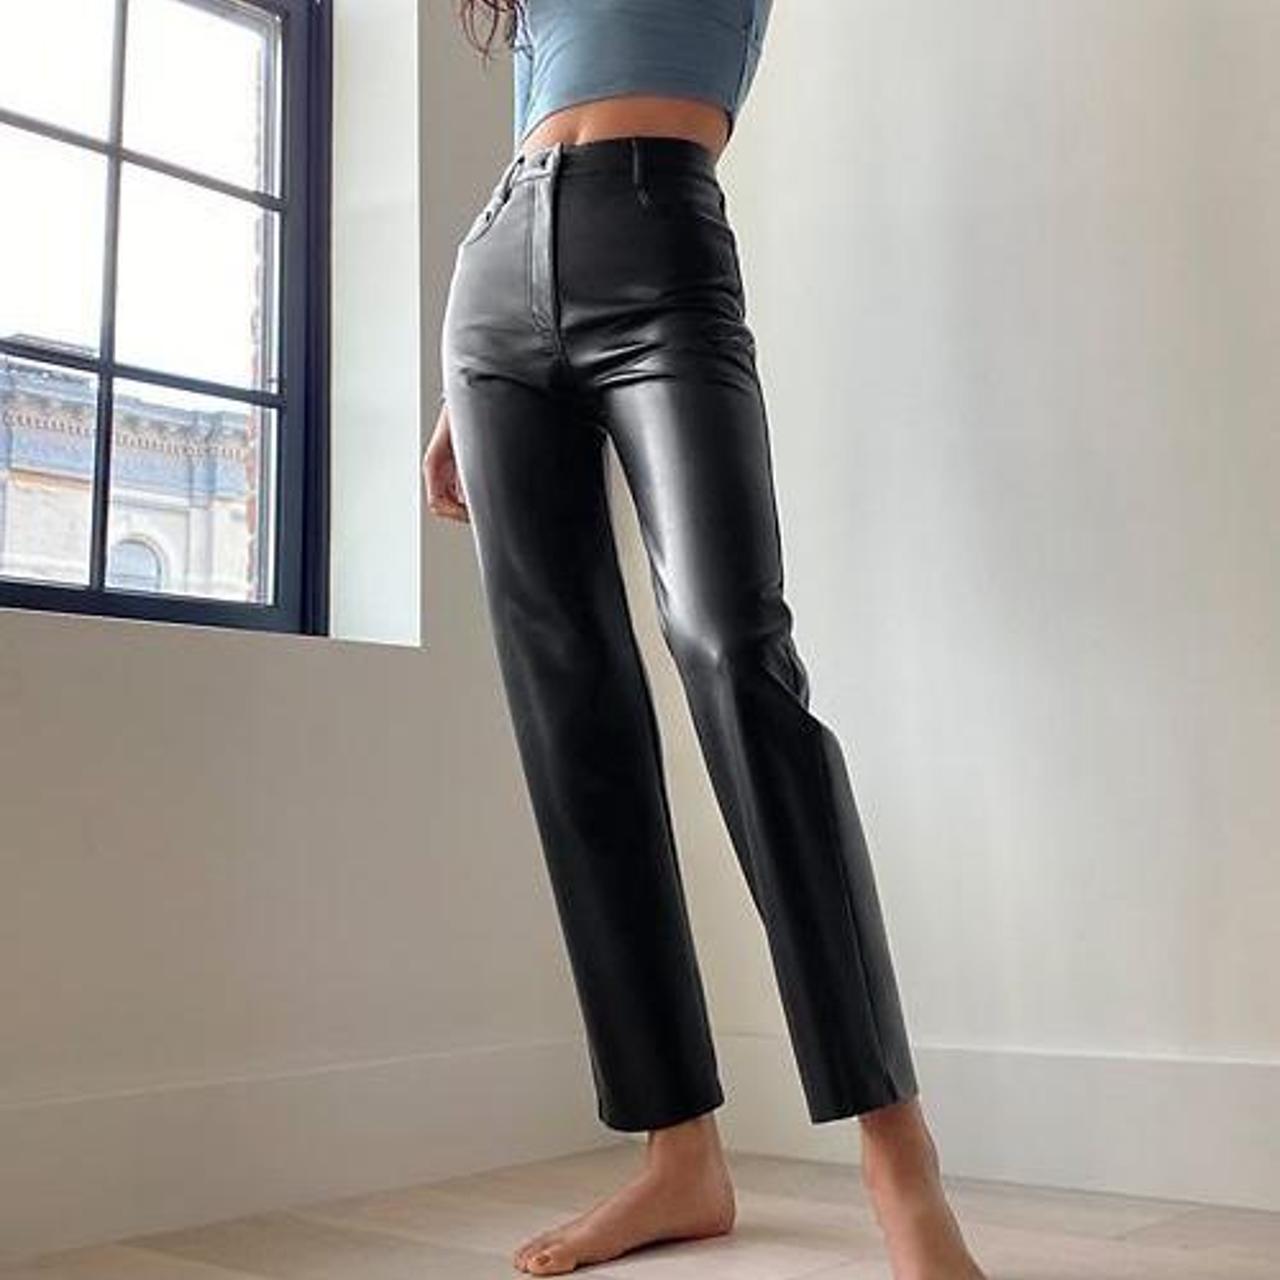 Limited Aritzia Wilfred Melina Leather Pants in Size... - Depop